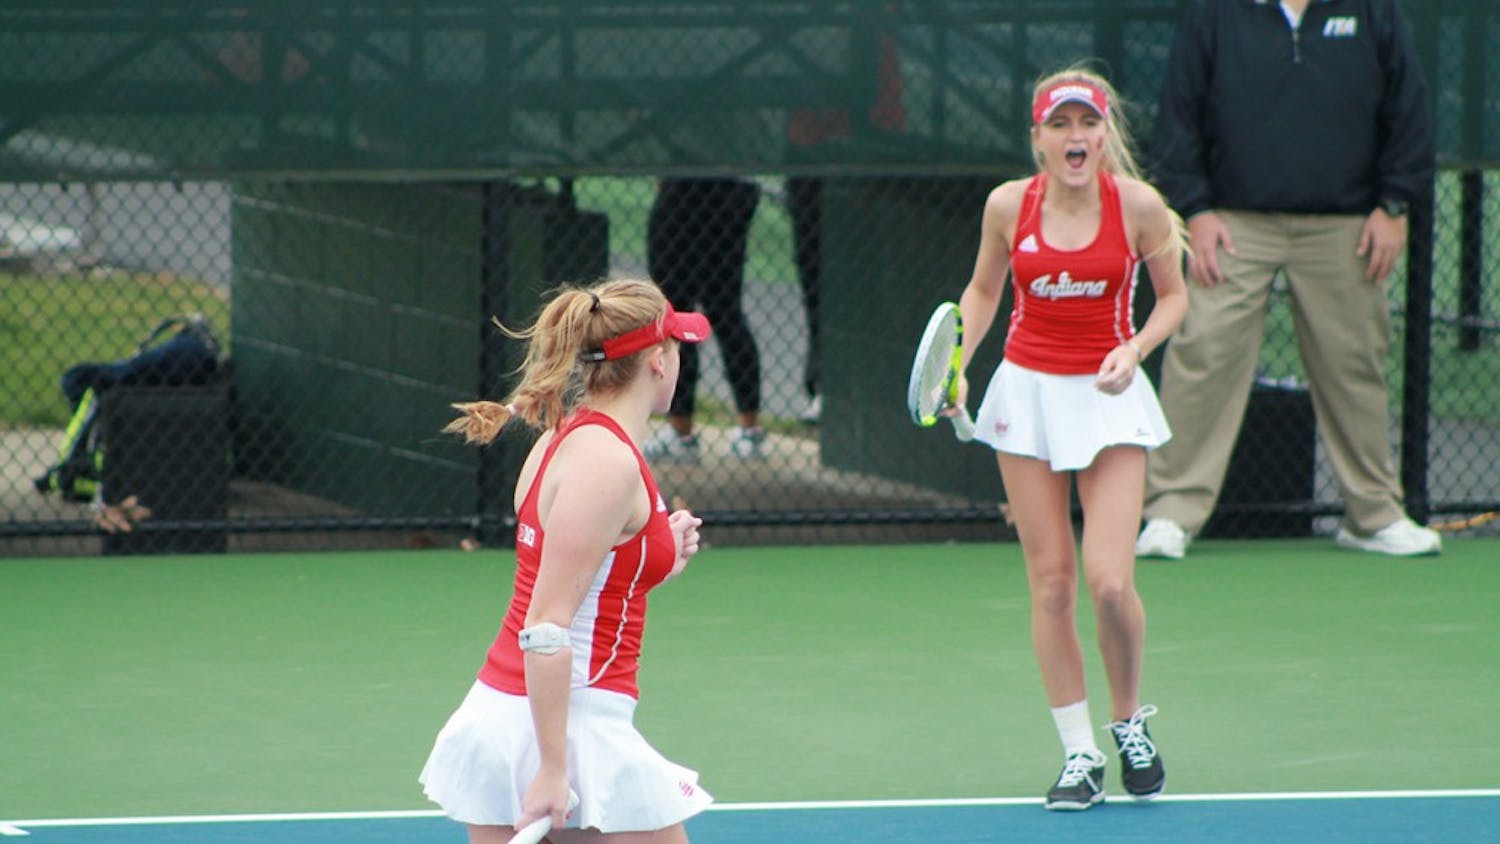 Partners Kim Schmider and Madison Appel celebrate after scoring a point in a doubles match Saturday morning. Schmider and Appel led 5-4 over No. 2 Michigan team when the match was stopped.&nbsp;